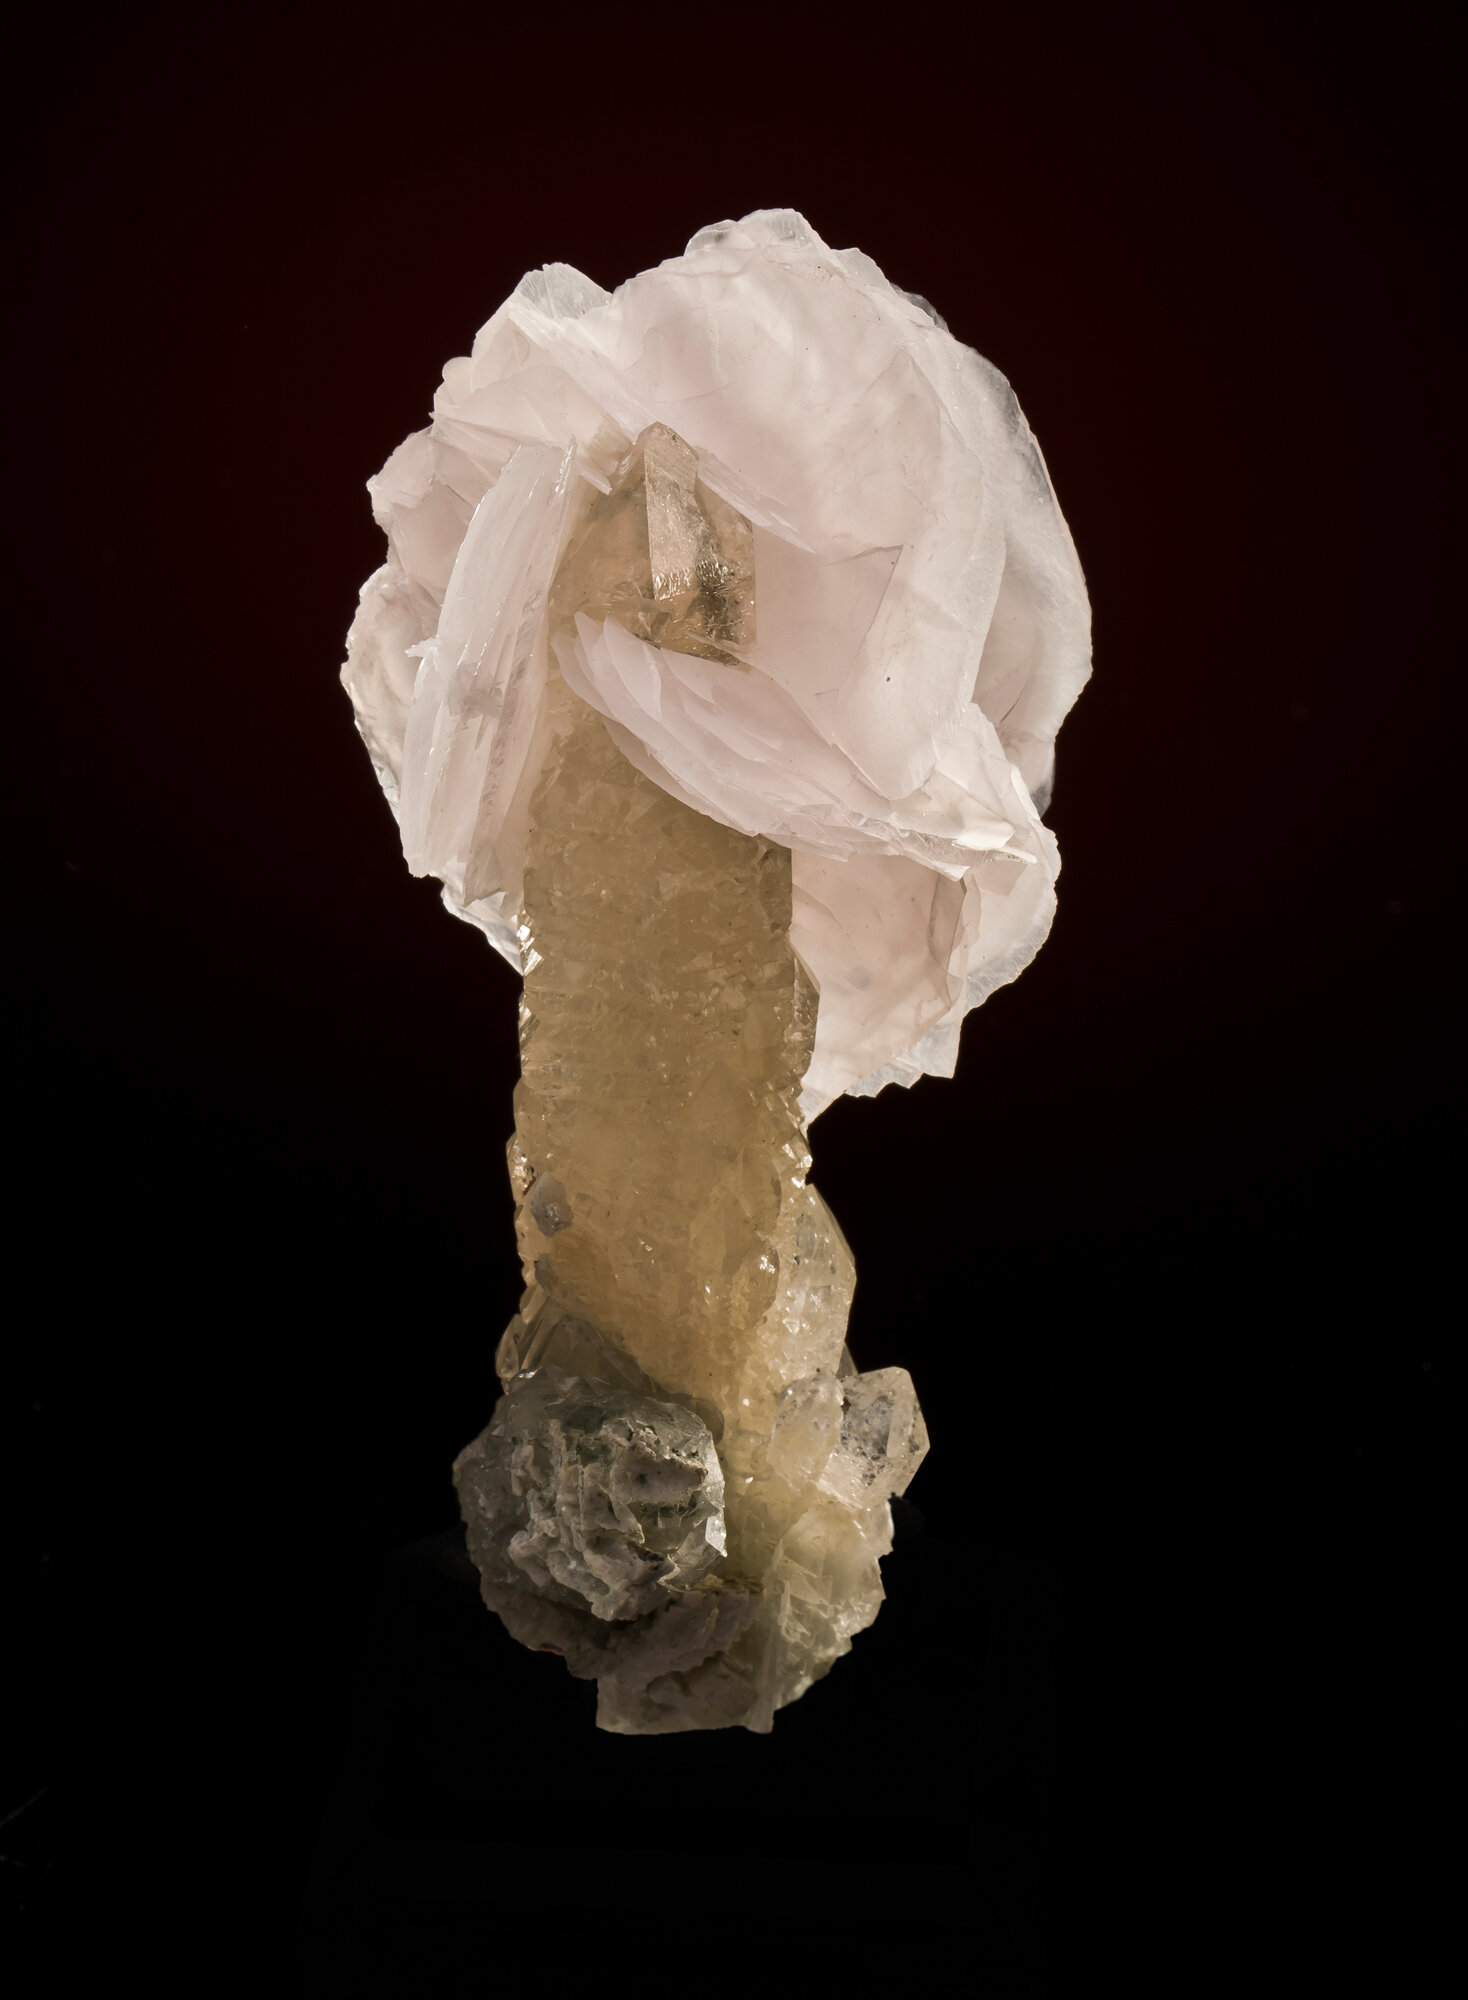  Calcite with quartz, 12 cm, from Huanggang mine No. 5, Keshiketeng County, Chifeng Prefecture, Inner Mongolia Autonomous Region, China. Found in 2012. 